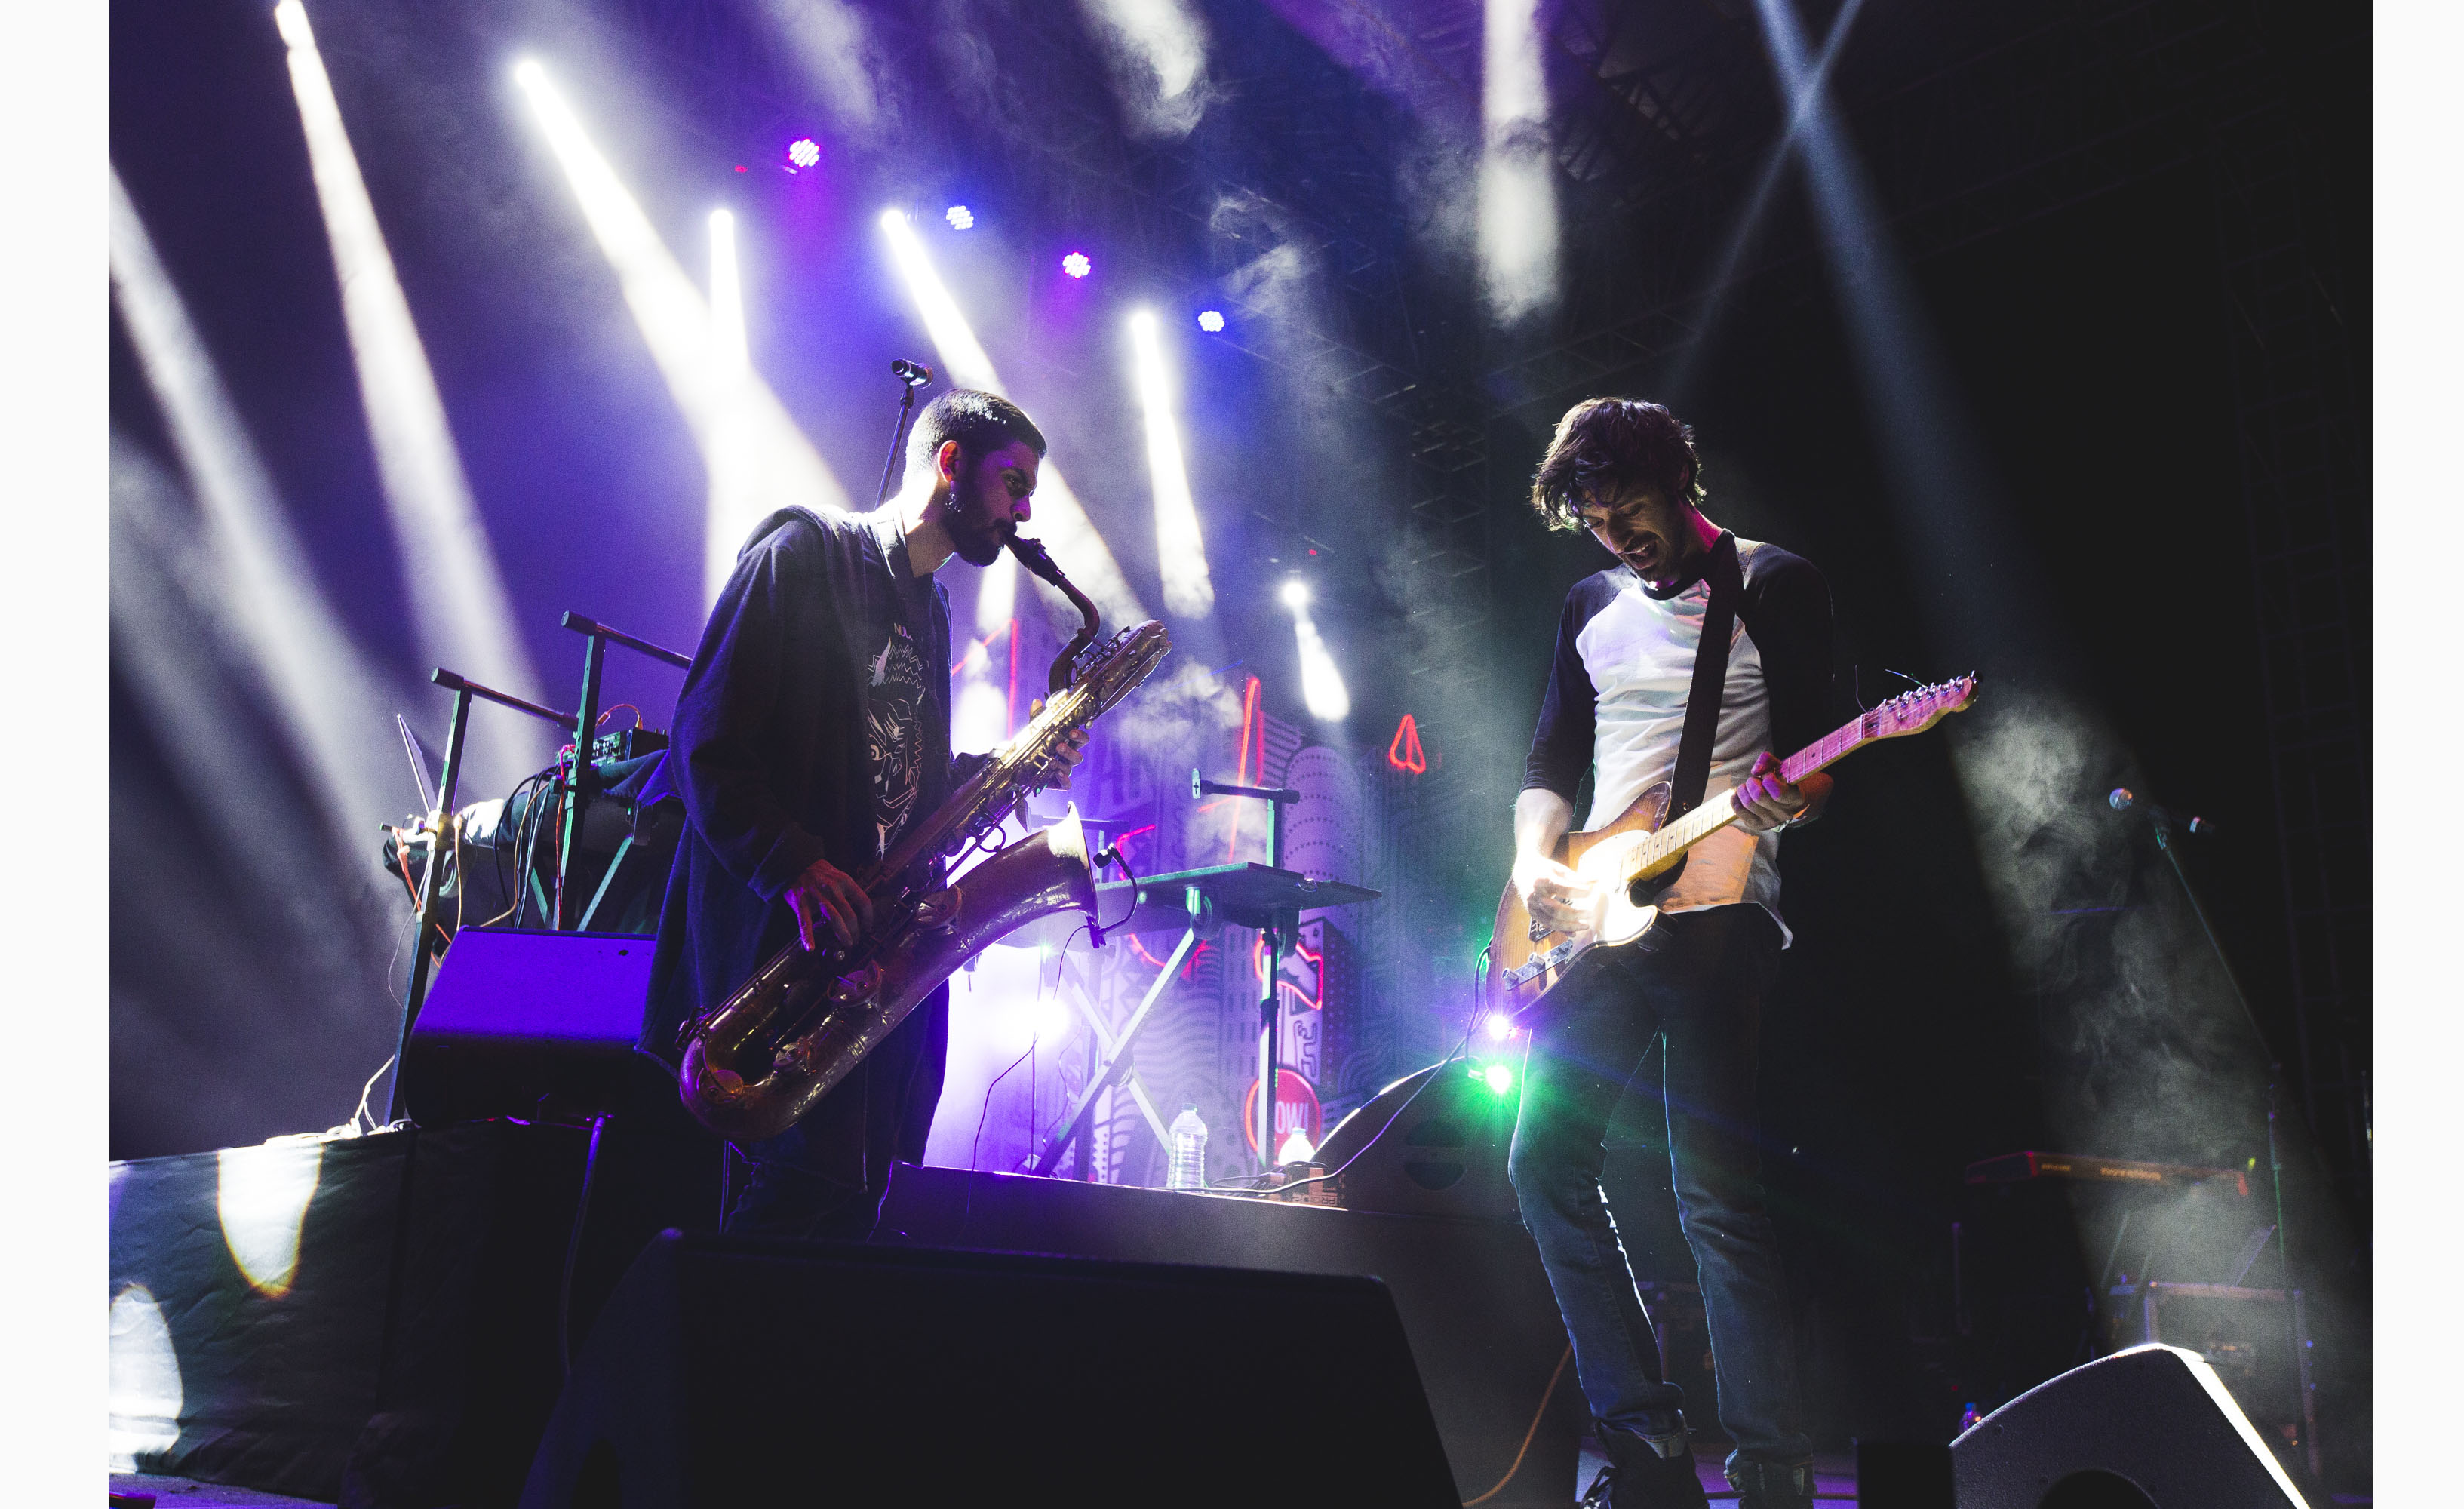 Dualist Inquiry & Sid Vashi performing on Day One of the Pune edition of BACARDI NH7 Weekender. Photo Credit - Parizad D